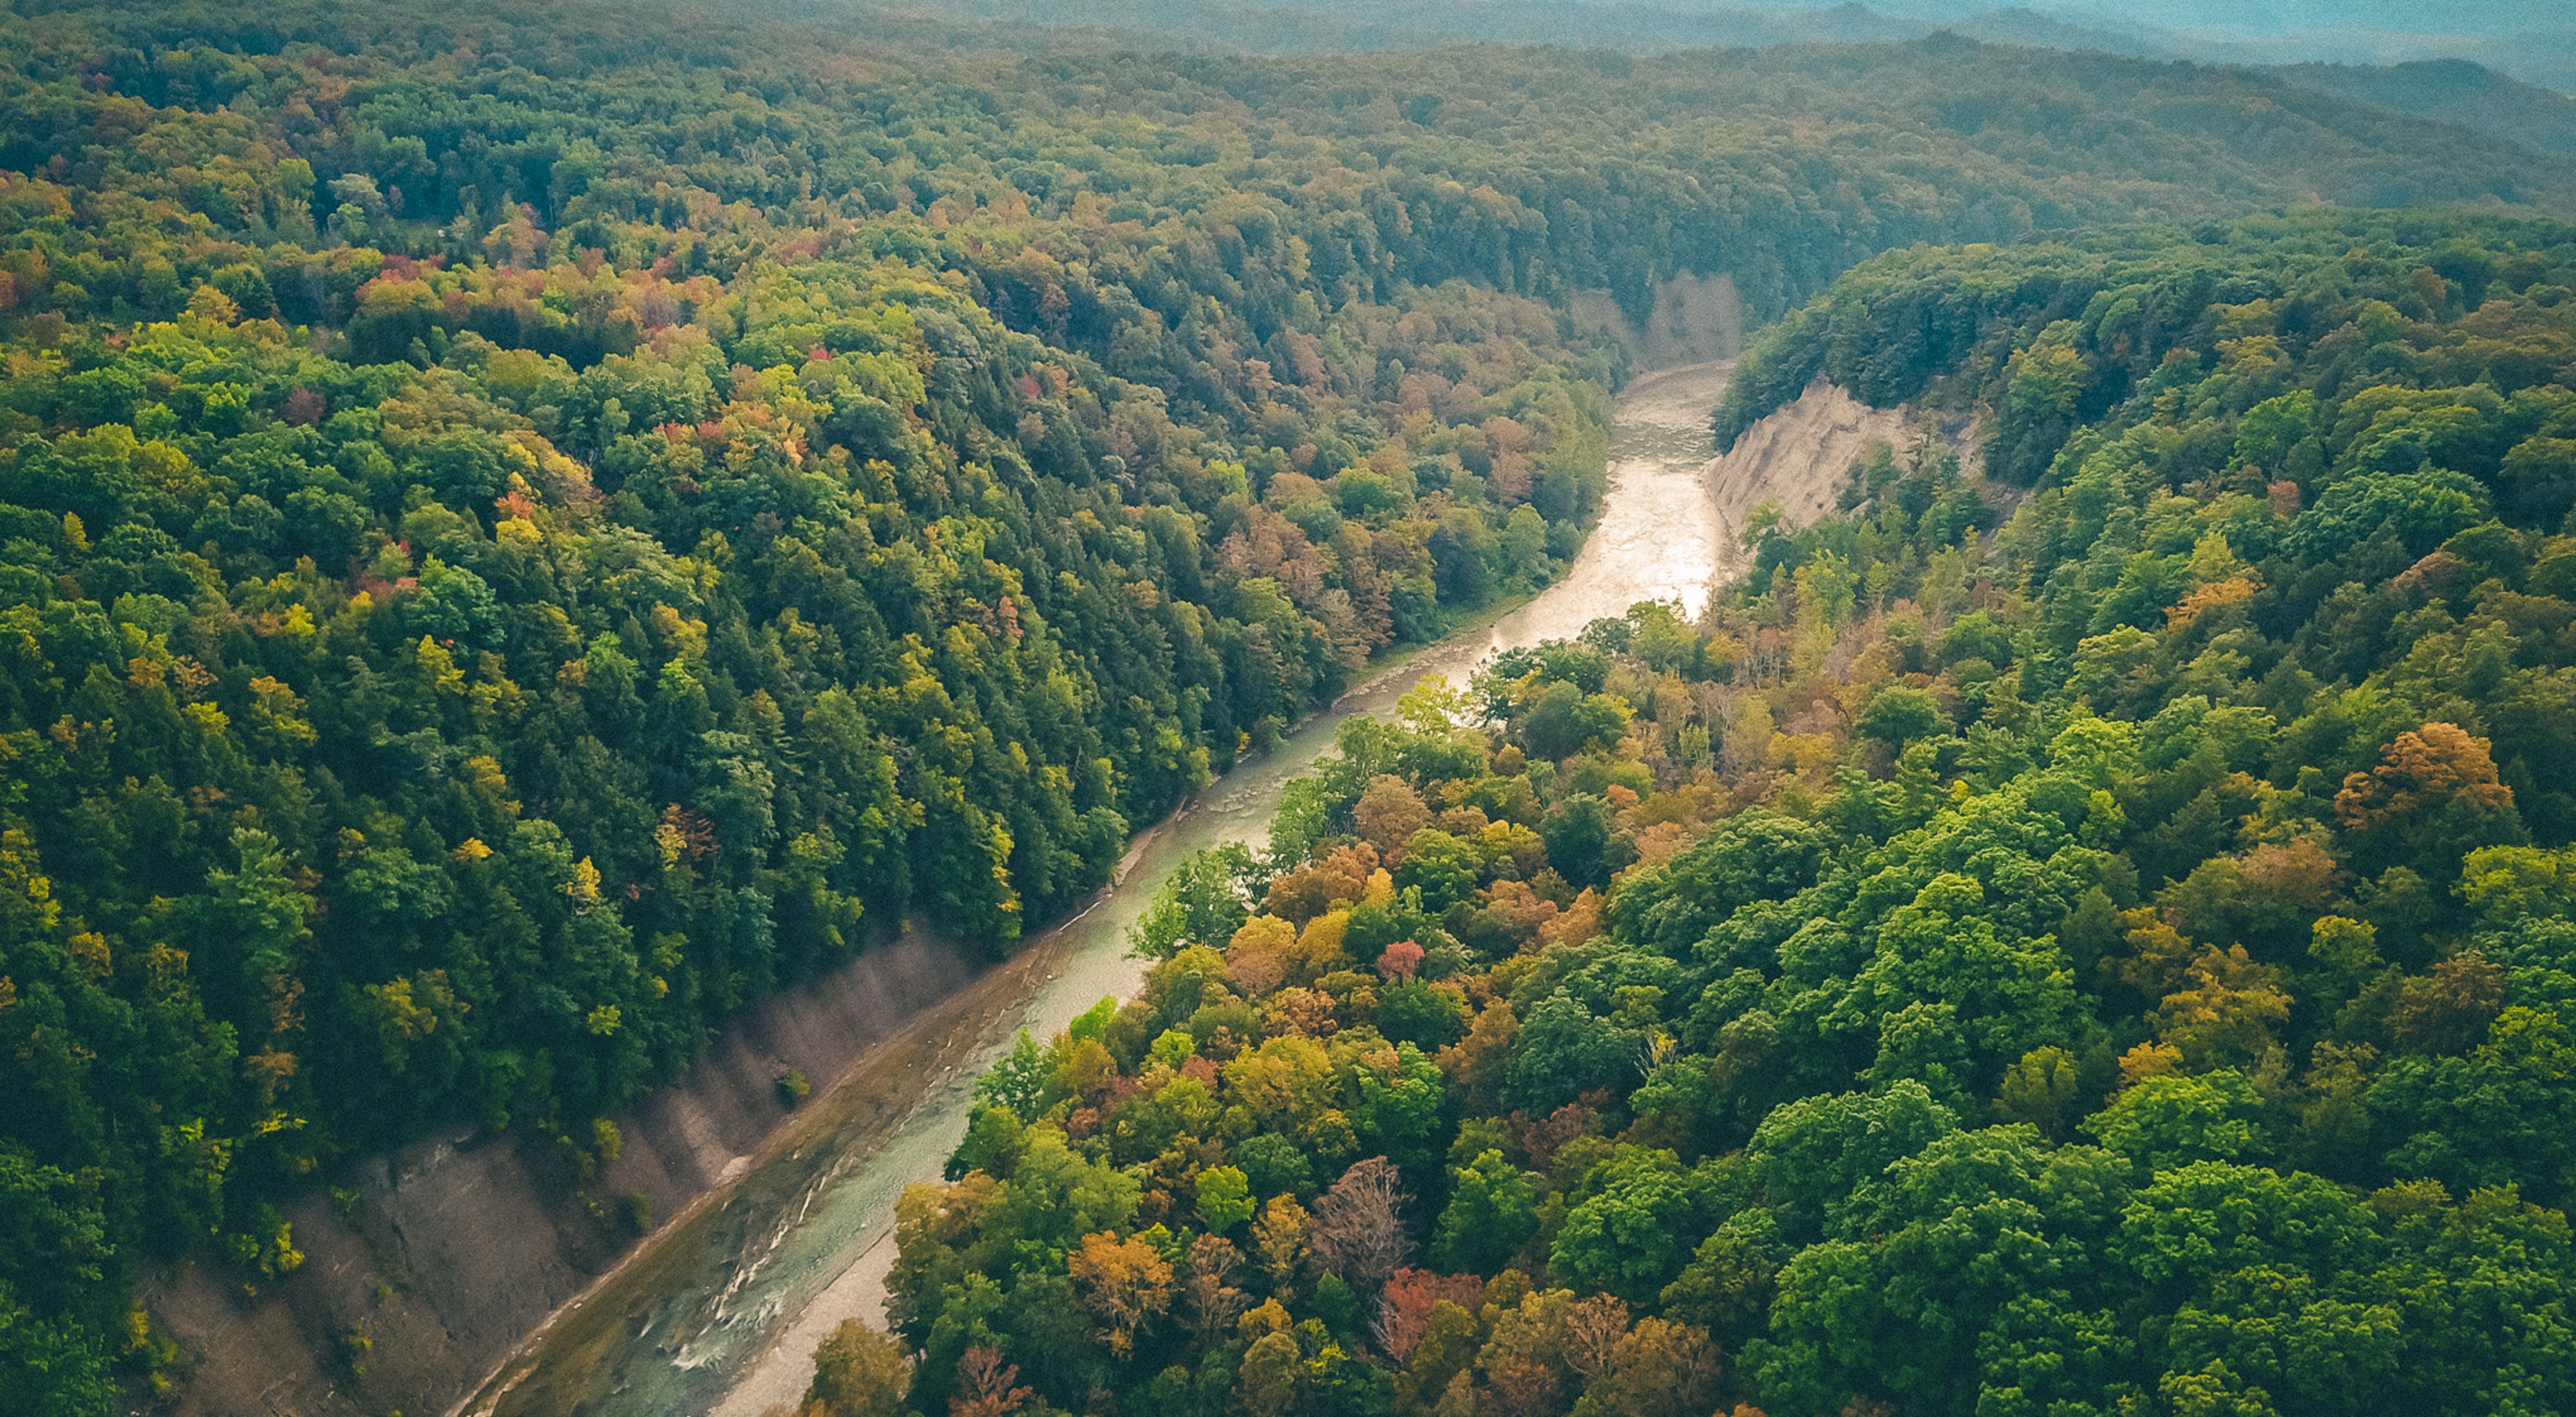 An aerial view of Zoar Valley forests and a river.